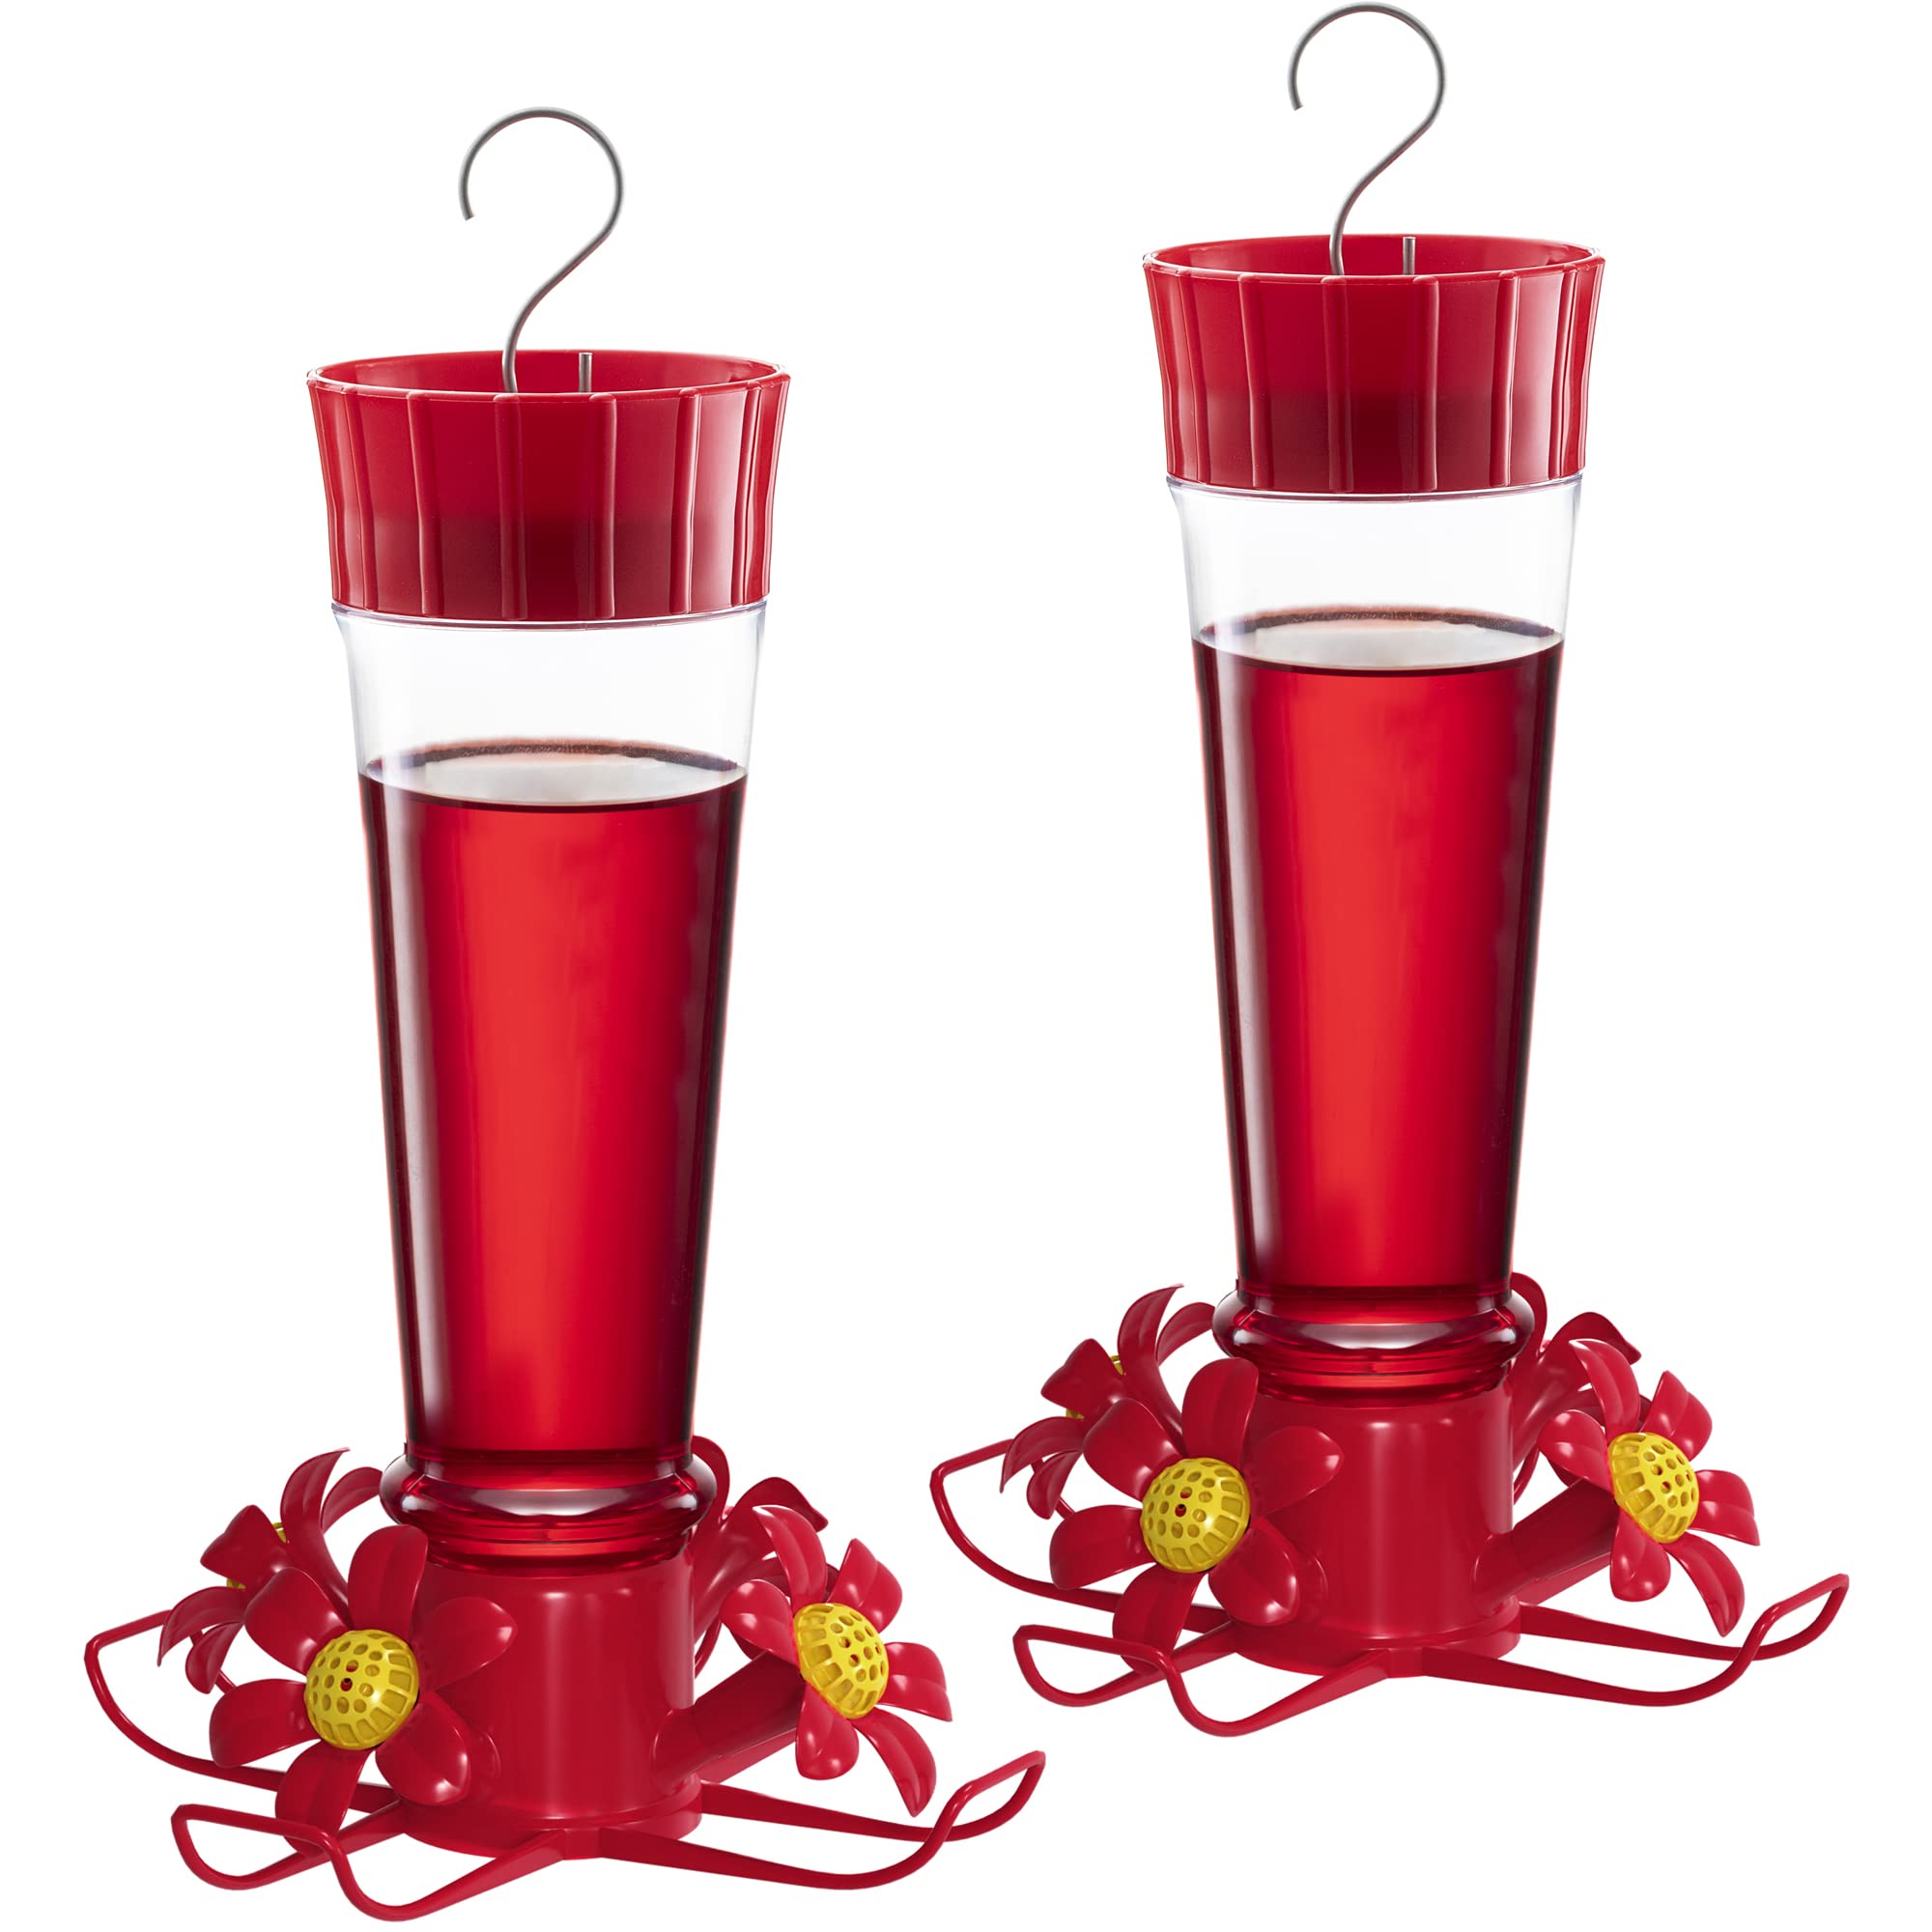 Hummingbird Feeder 10 oz. [Set of 2] Glass Hummingbird Feeders for Outdoors, with Built-in Ant Guard - Circular Perch with 5 Feeding Ports - Wide Mouth for Easy Filling/2 Part Base for Easy Cleaning  - Very Good